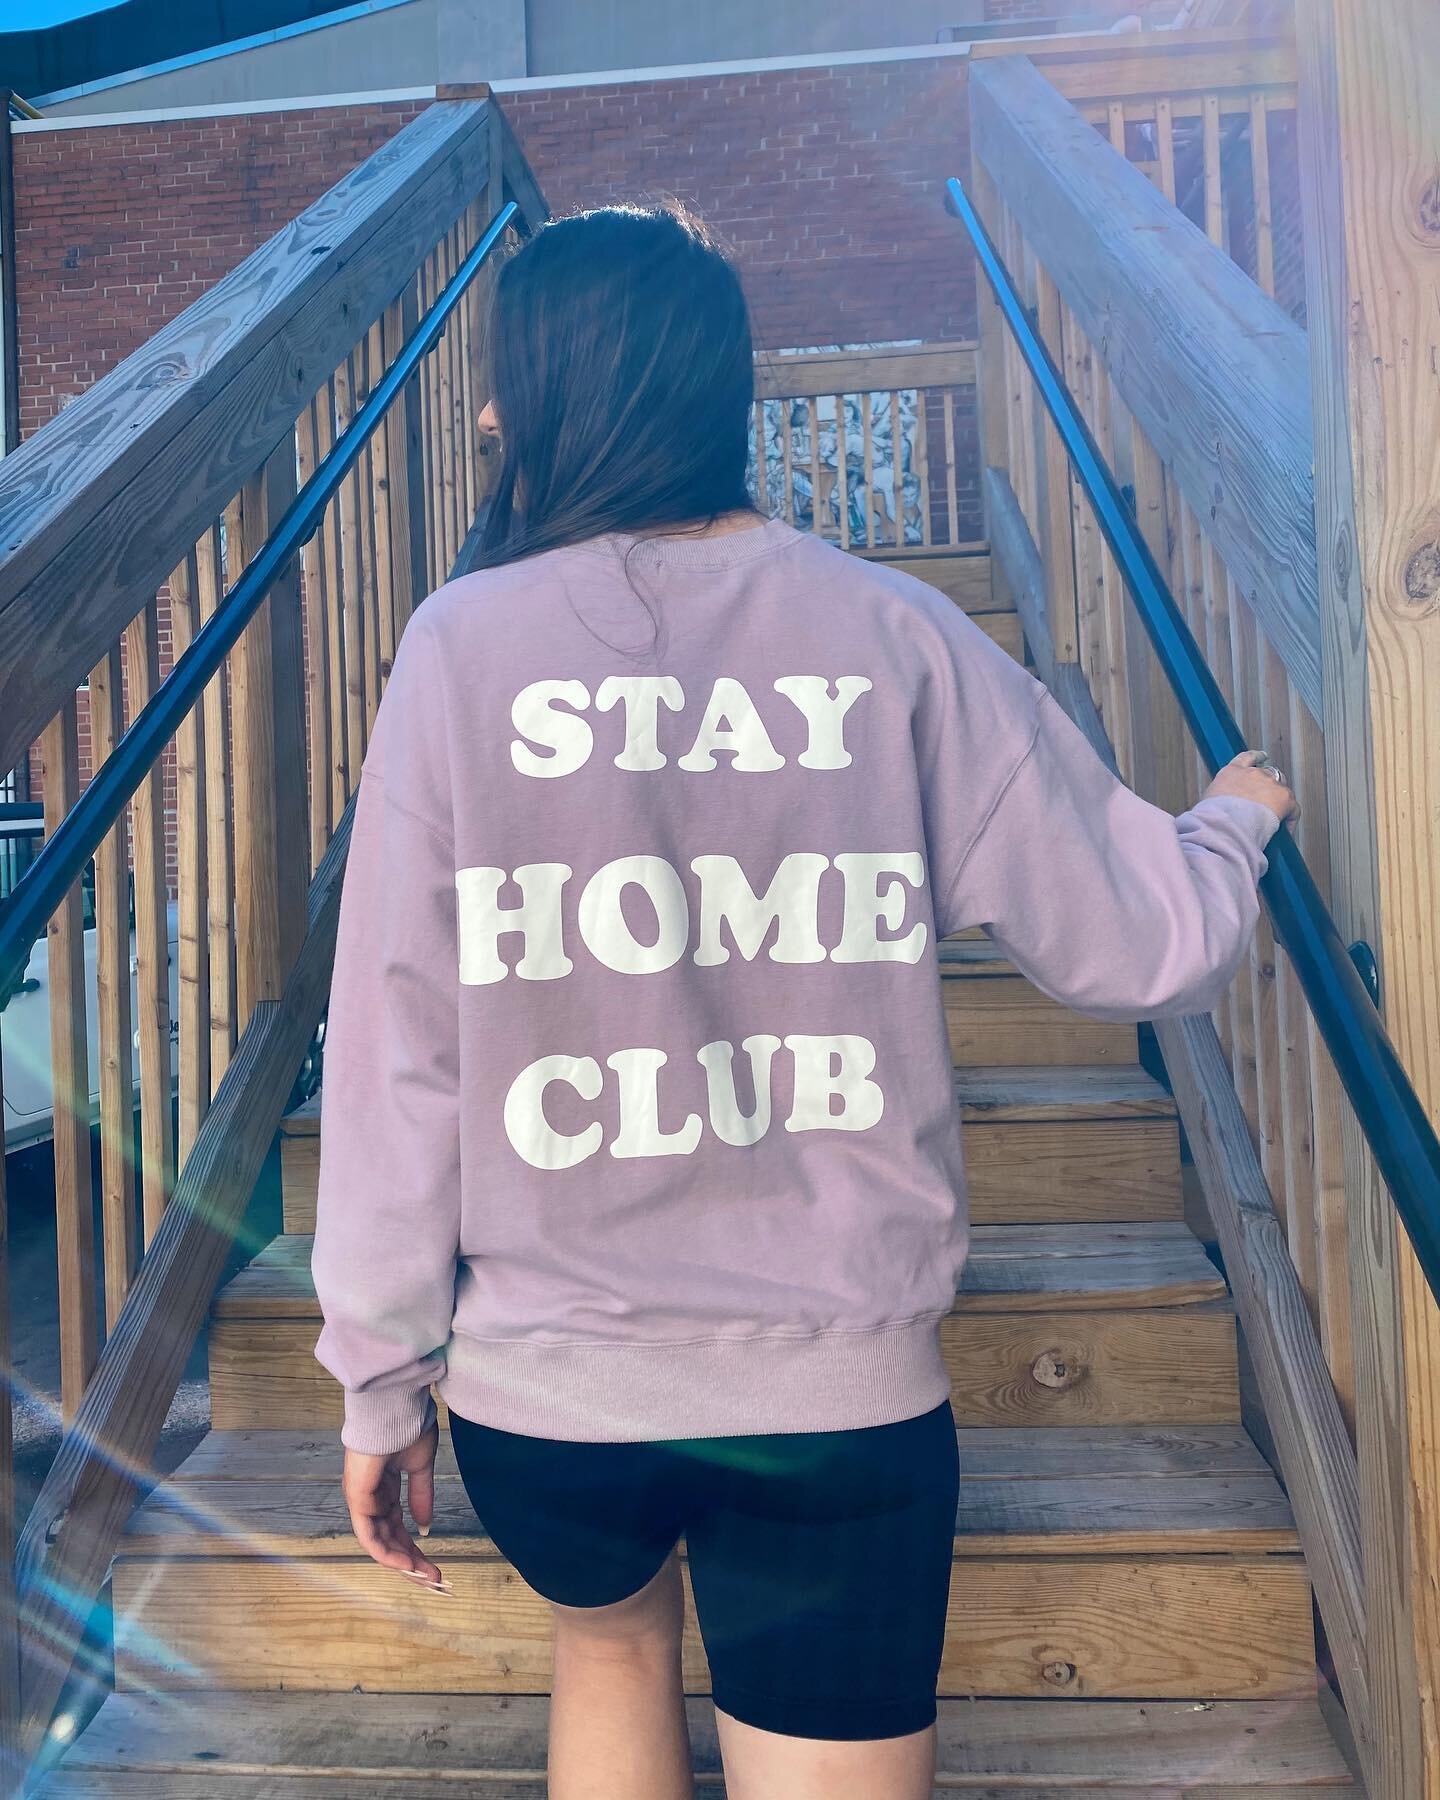 The perfect sweatshirt for 2020
&bull;
-
&bull;
-
#stayhomeclub #2020 #boutiqueshopping #boutique #shopsmall #supportlocal #pennstate #happyvalley #statecollege #connectionsclothingsc